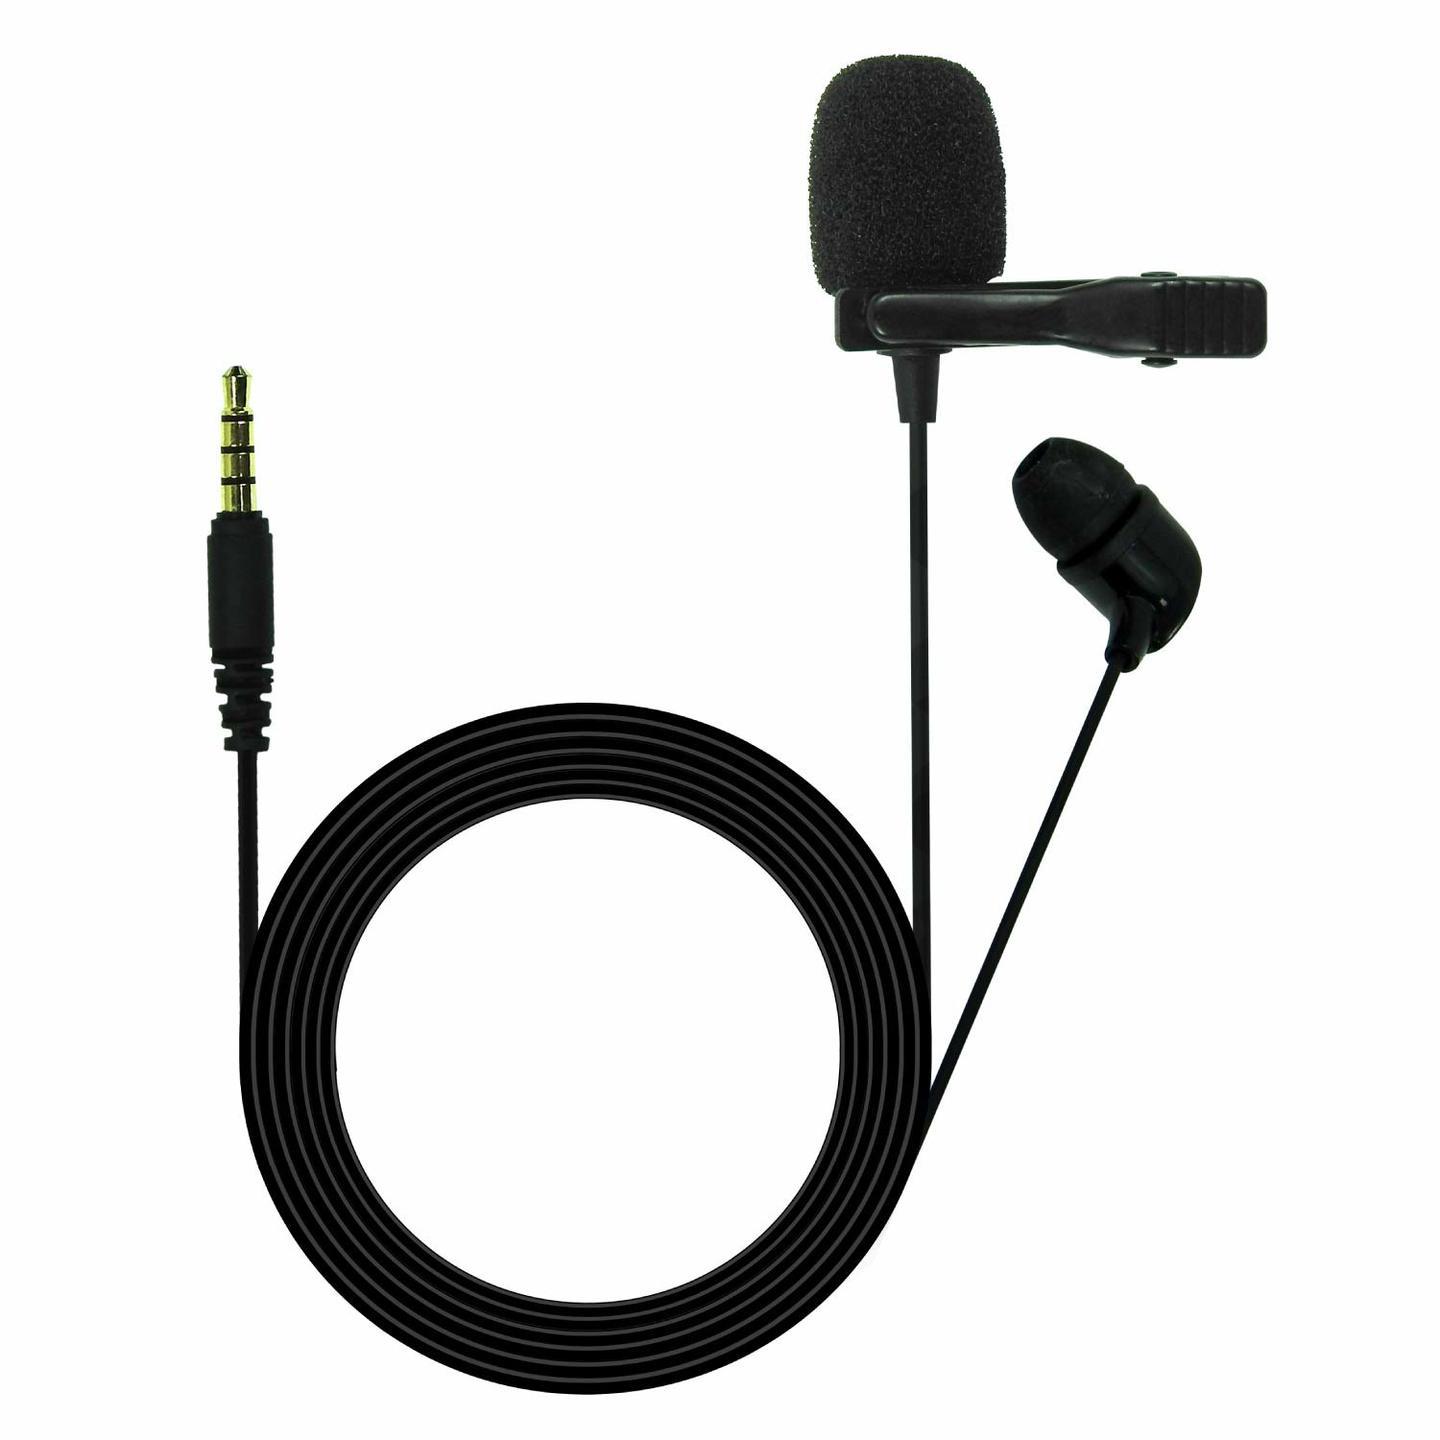 JBL Commercial CSLM20 Omnidirectional Lavalier Microphone